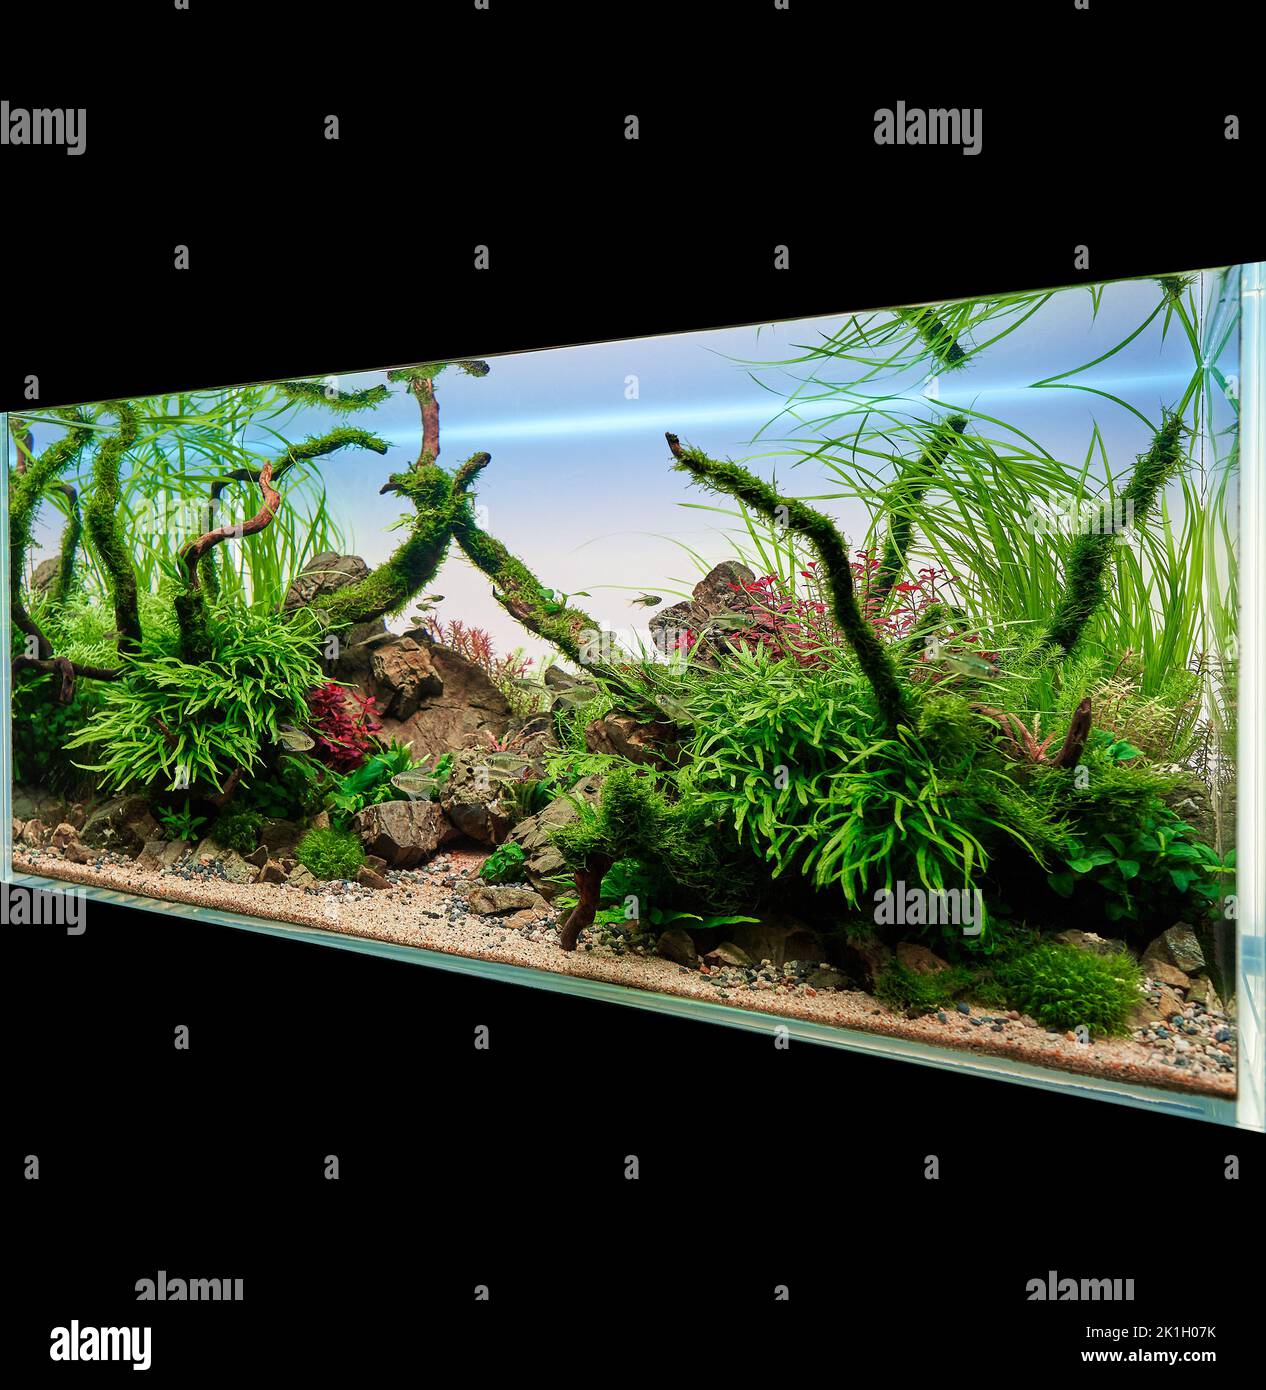 Aquascaped freshwater aquarium with live plants, stones and Redmoor roots in isometric view. Microsorum Trident, various rotalas, anubias. Stock Photo